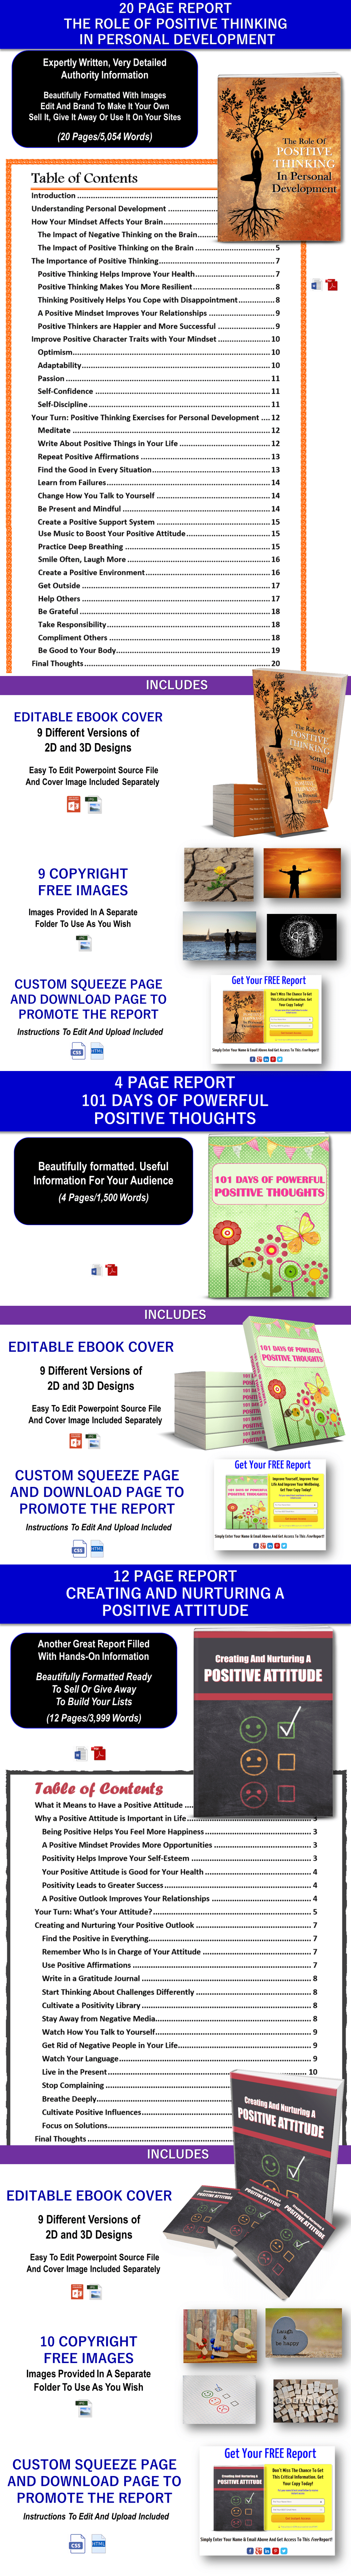 Positive Attitude and Positive Thinking Content with PLR Rights